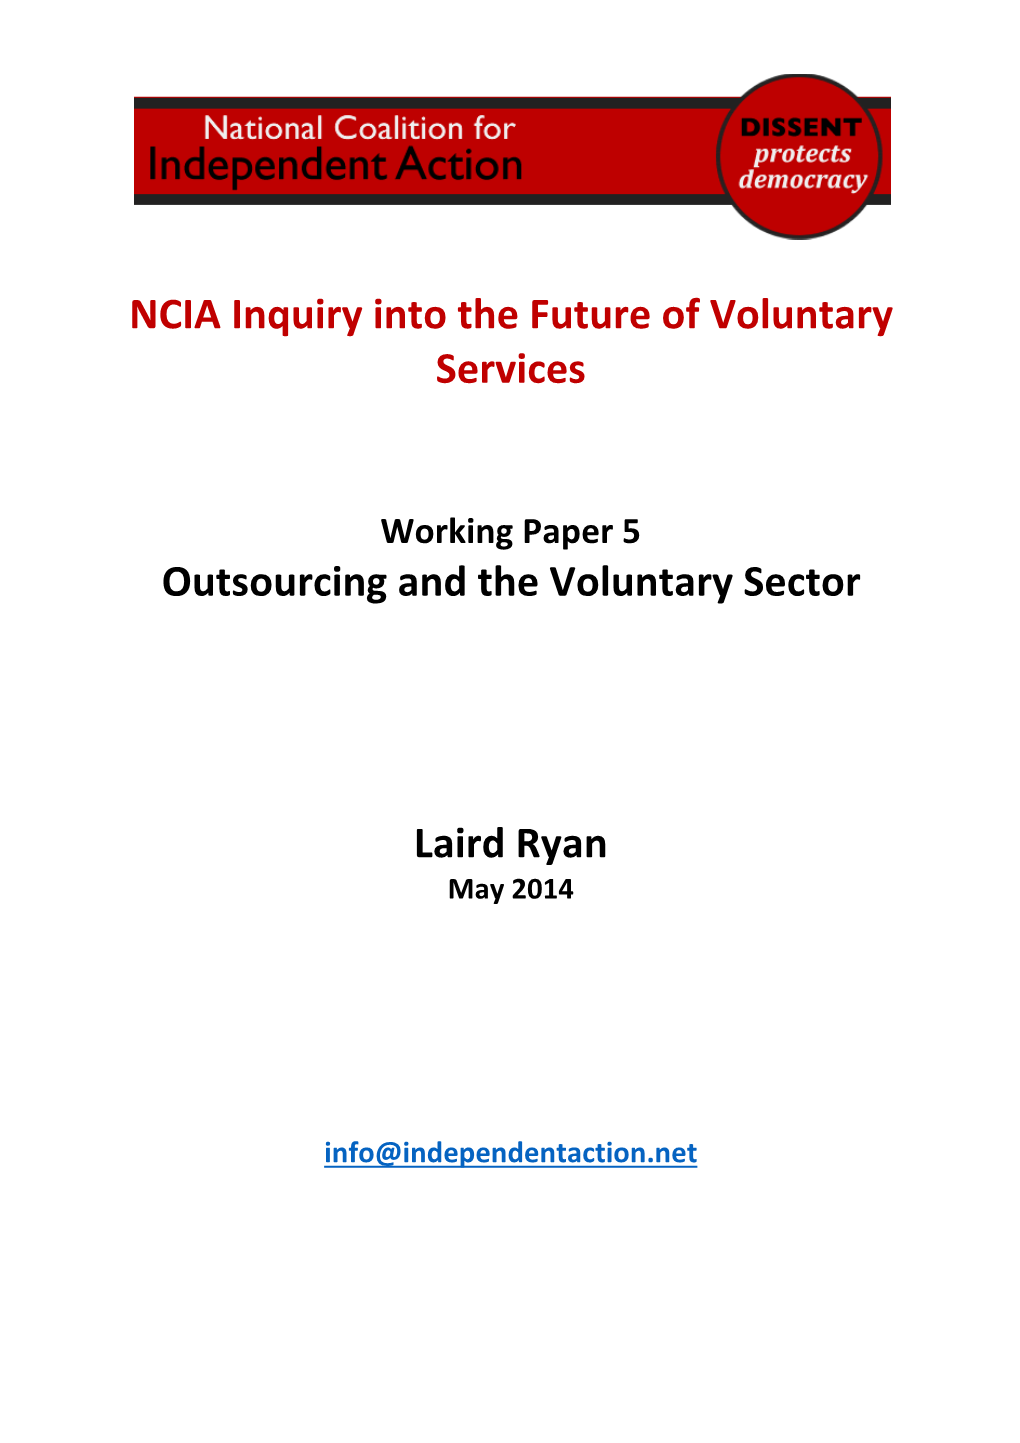 NCIA Inquiry Into the Future of Voluntary Services Outsourcing and the Voluntary Sector Laird Ryan